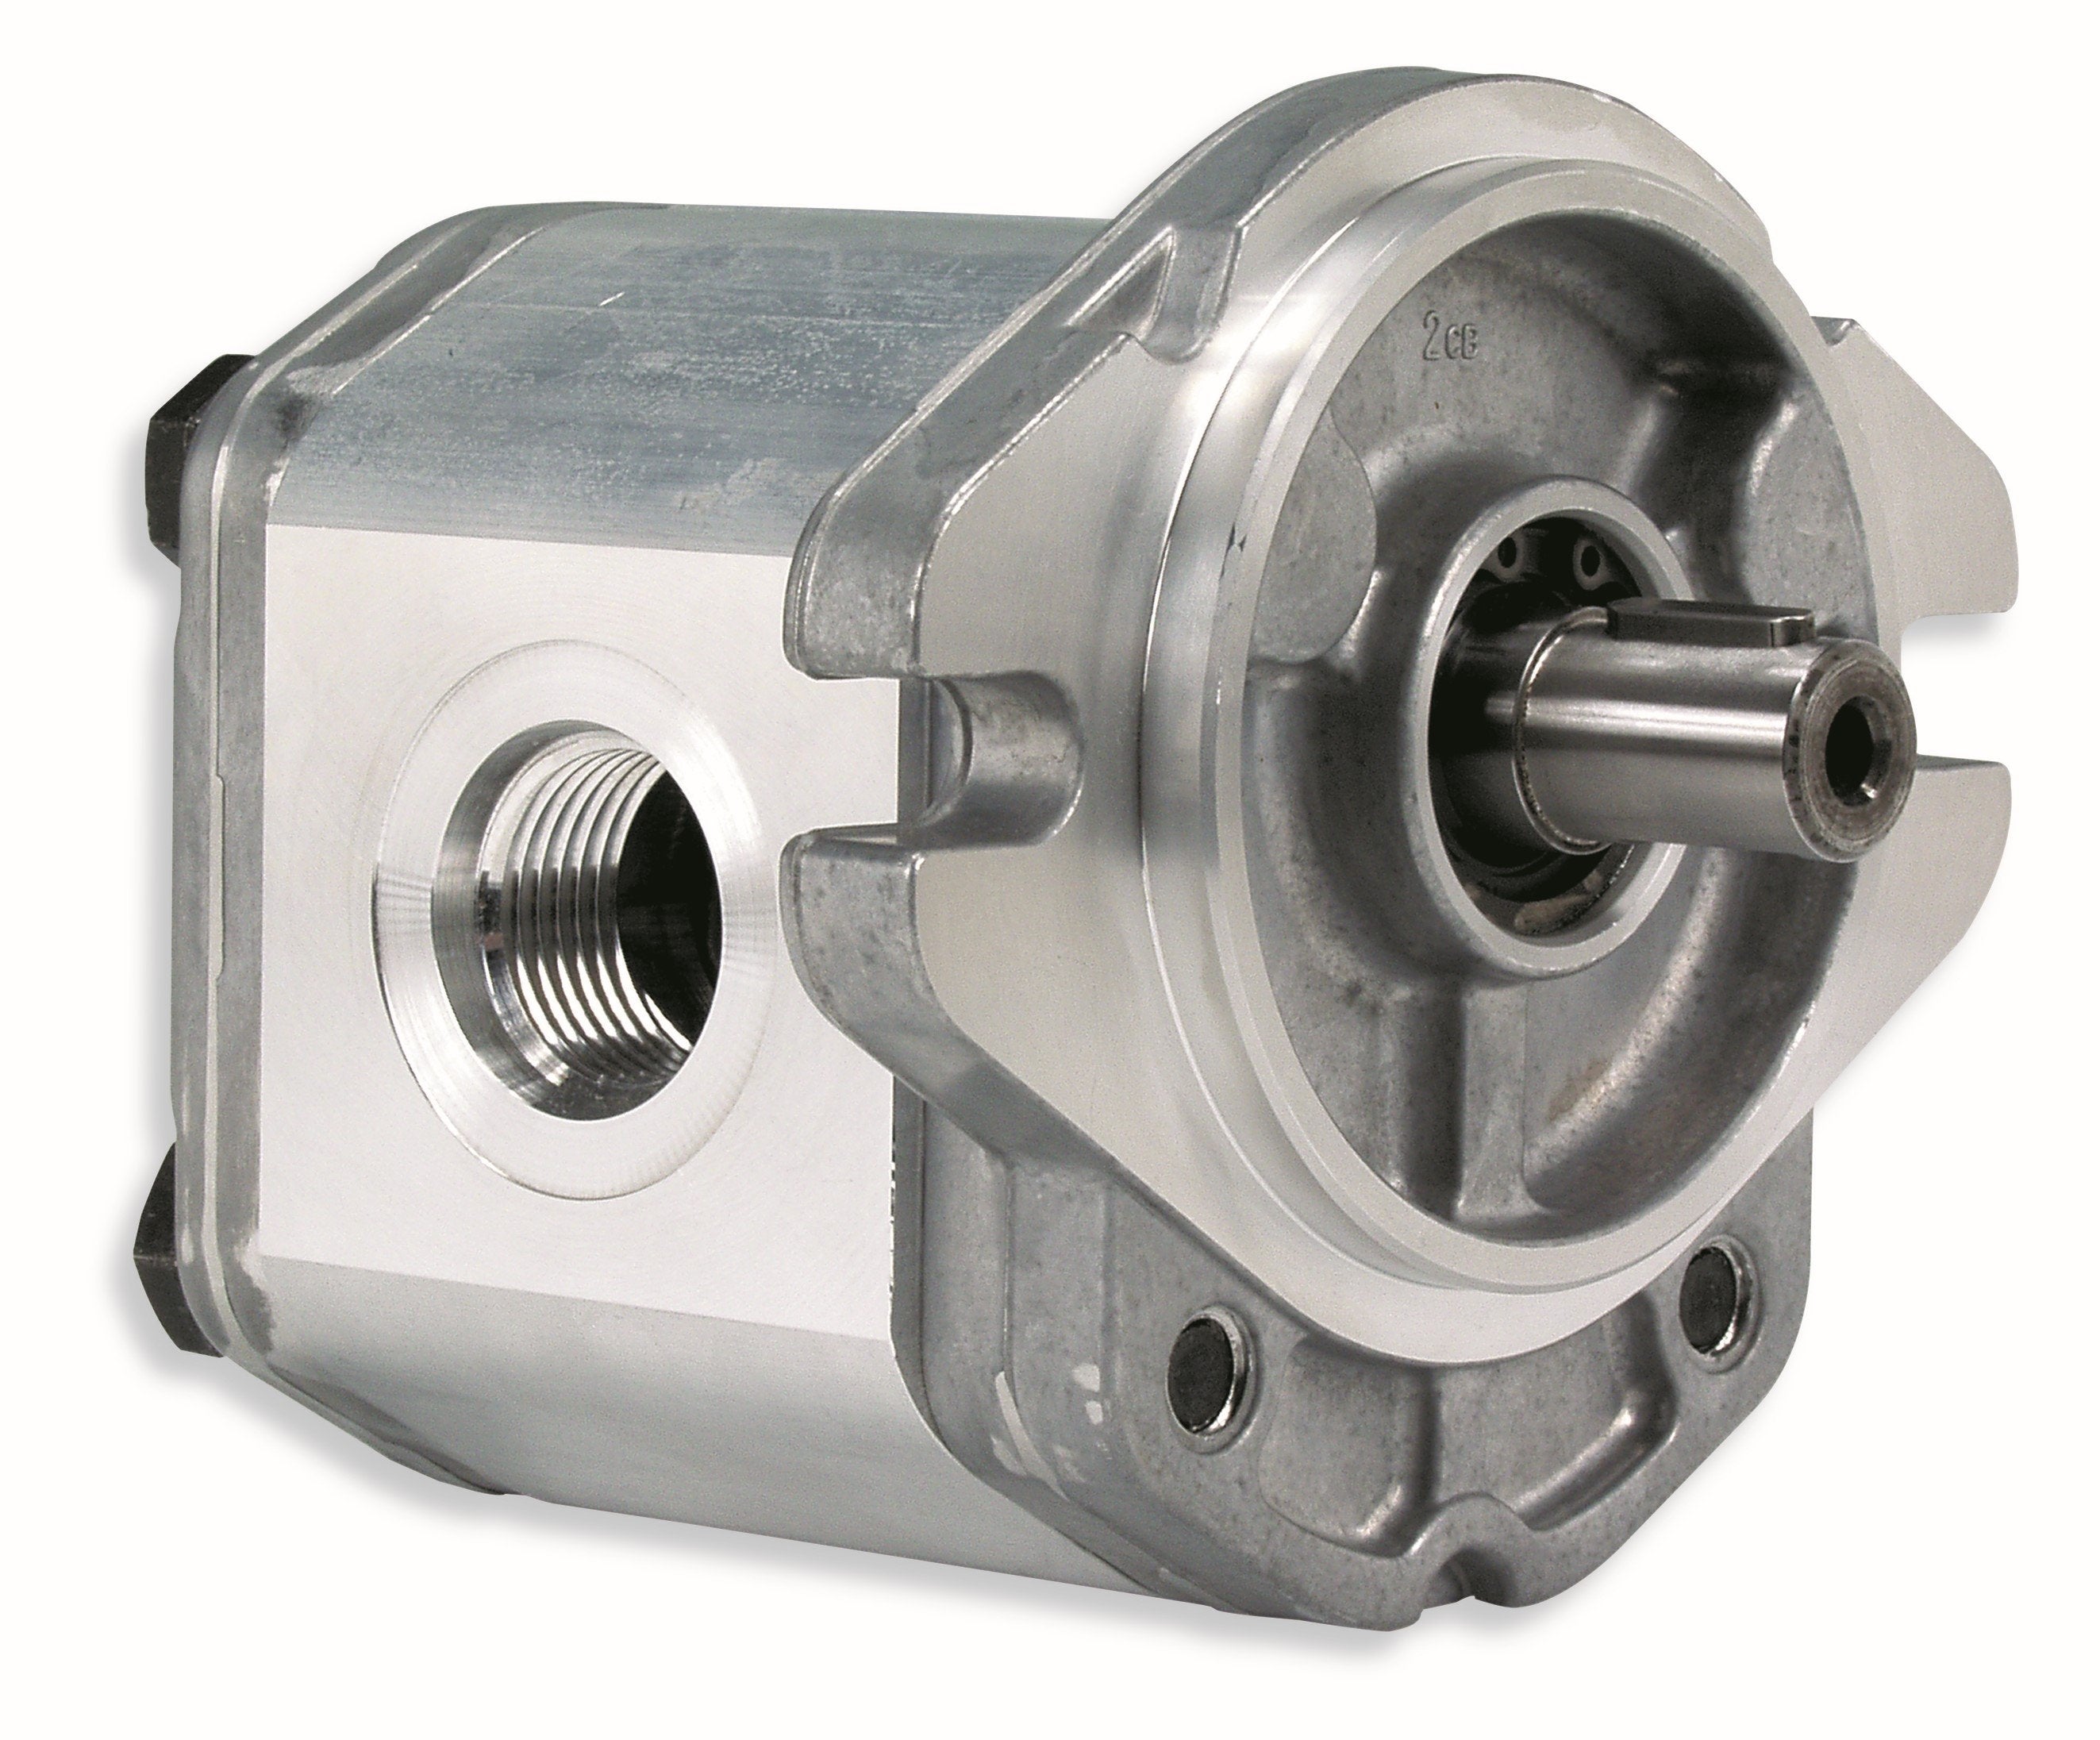 GHM2A-R-16-E2 : Marzocchi Gear Motor, Bidirectional, 11.5cc, 4060psi rated, 4000RPM, 0.75 (3/4") #12 SAE ports, 5/8" Bore x 5/32" Keyed Shaft